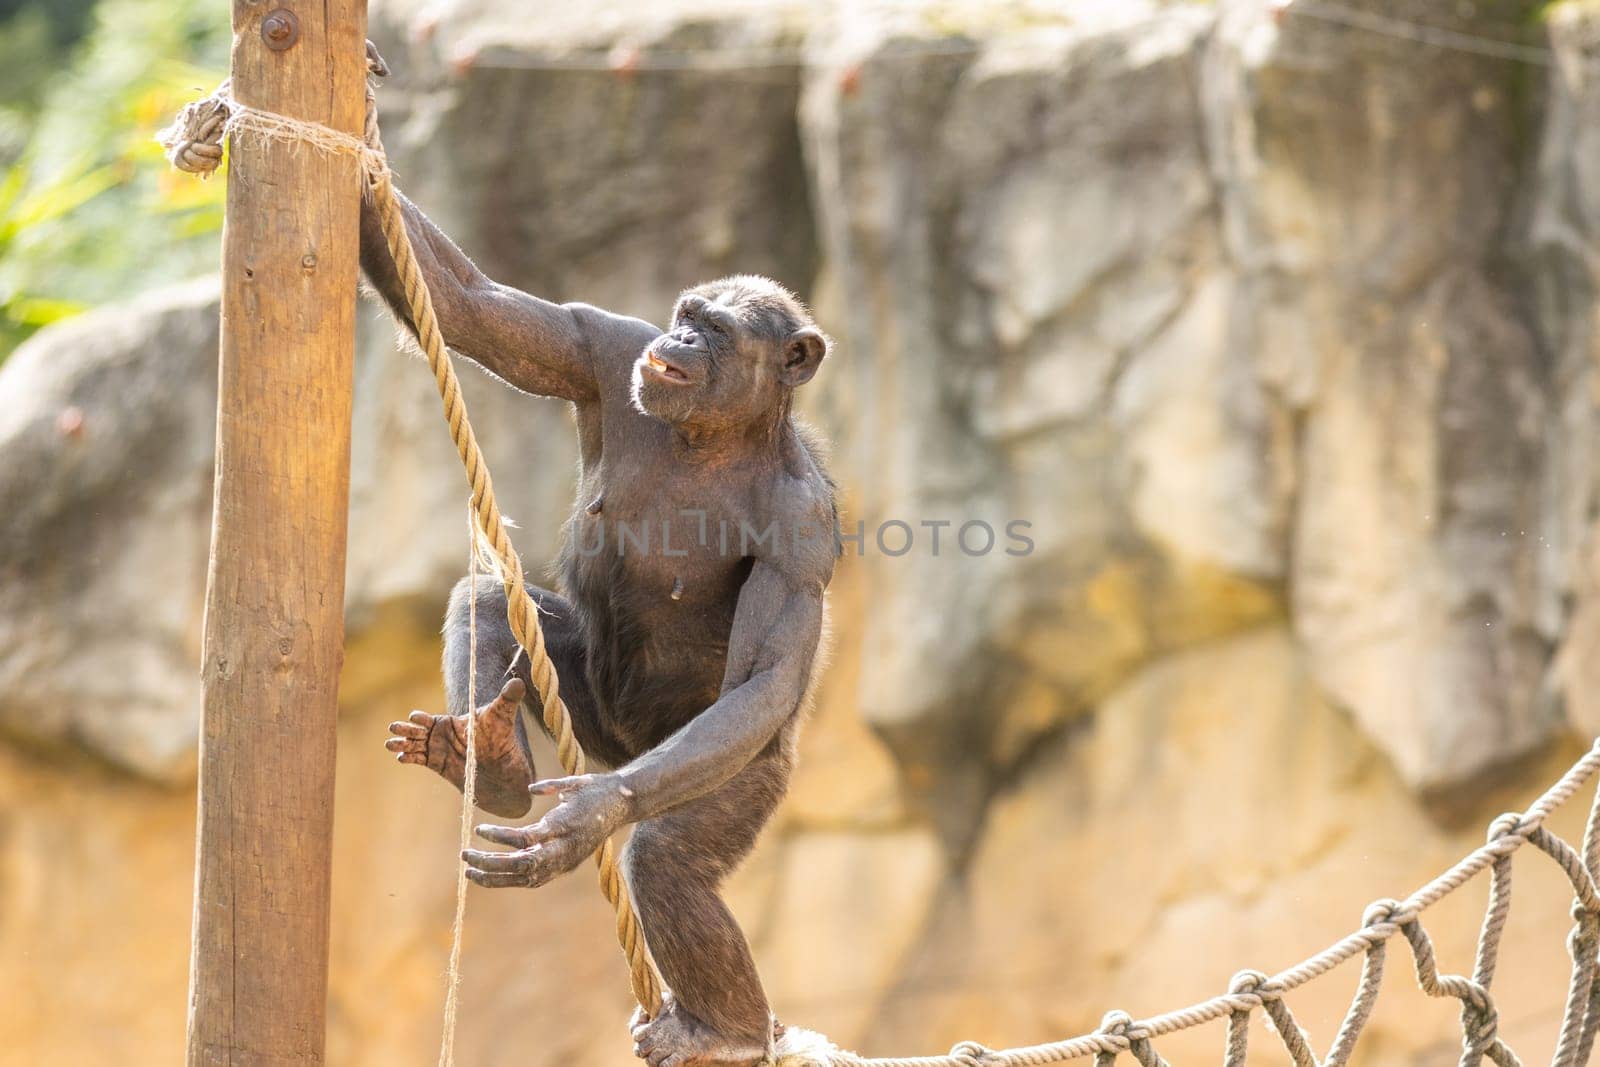 Monkey Acrobatics: A Playful Primate Ascending a Rope with Agility and Precision by Studia72